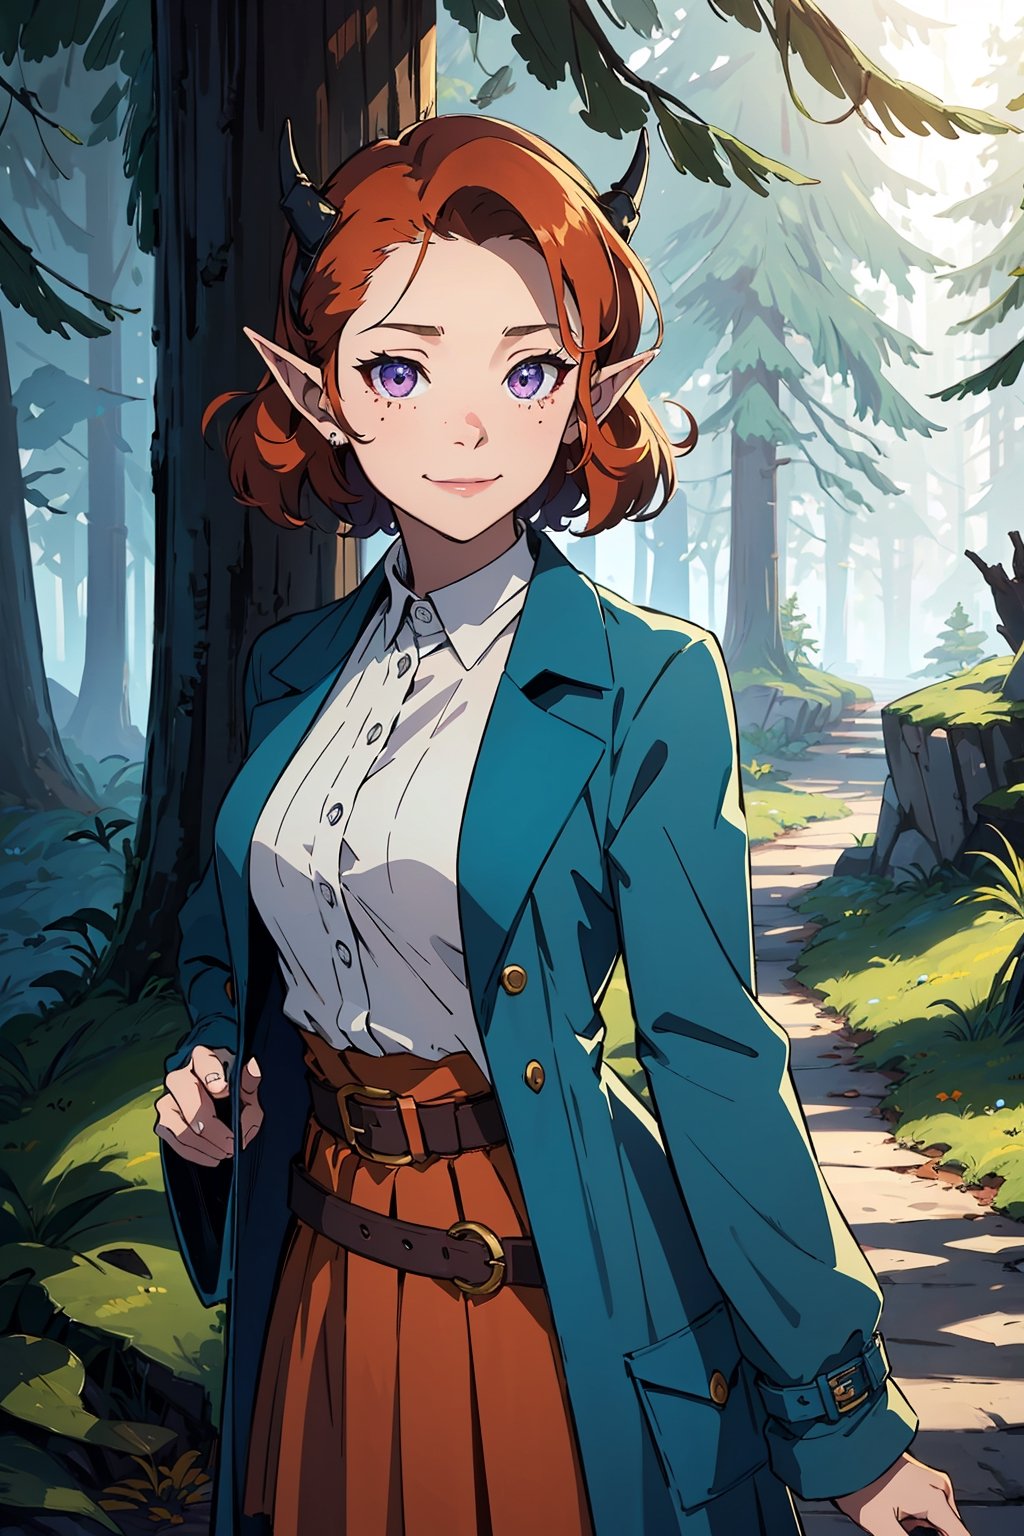 Imagine a female child with short fluffy and messy curly bright orange hair. Her eyes are a bright shade of green, sparkling with intricate detail and a hit on magic. She has pointed elf ears. She has two short horns on her head. She has an evil smile on her face that shows she's up to no good. She has warm freckles on her face. She wears a white button up long sleeve top and a long purple skirt and long green trench coat with lots of pockets. She is practicing magic that sparkles around her. The background is a charming forest path in the enchanted woods with bright lighting, creating a magical ambiance. This artwork captures the essence of mischief and magic against the backdrop of a beautiful setting. detailed, detail_eyes, detailed_hair, detailed_scenario, detailed_hands, detailed_background,FFIXBG, fantasy.,Tex Mex Burrito Style,aka shiba,yoshida akihiko,MOLESTATION,SAM YANG,vox machina style,niloudef,monadef,KurashimaChiyuri, small breast, short hair,Circle